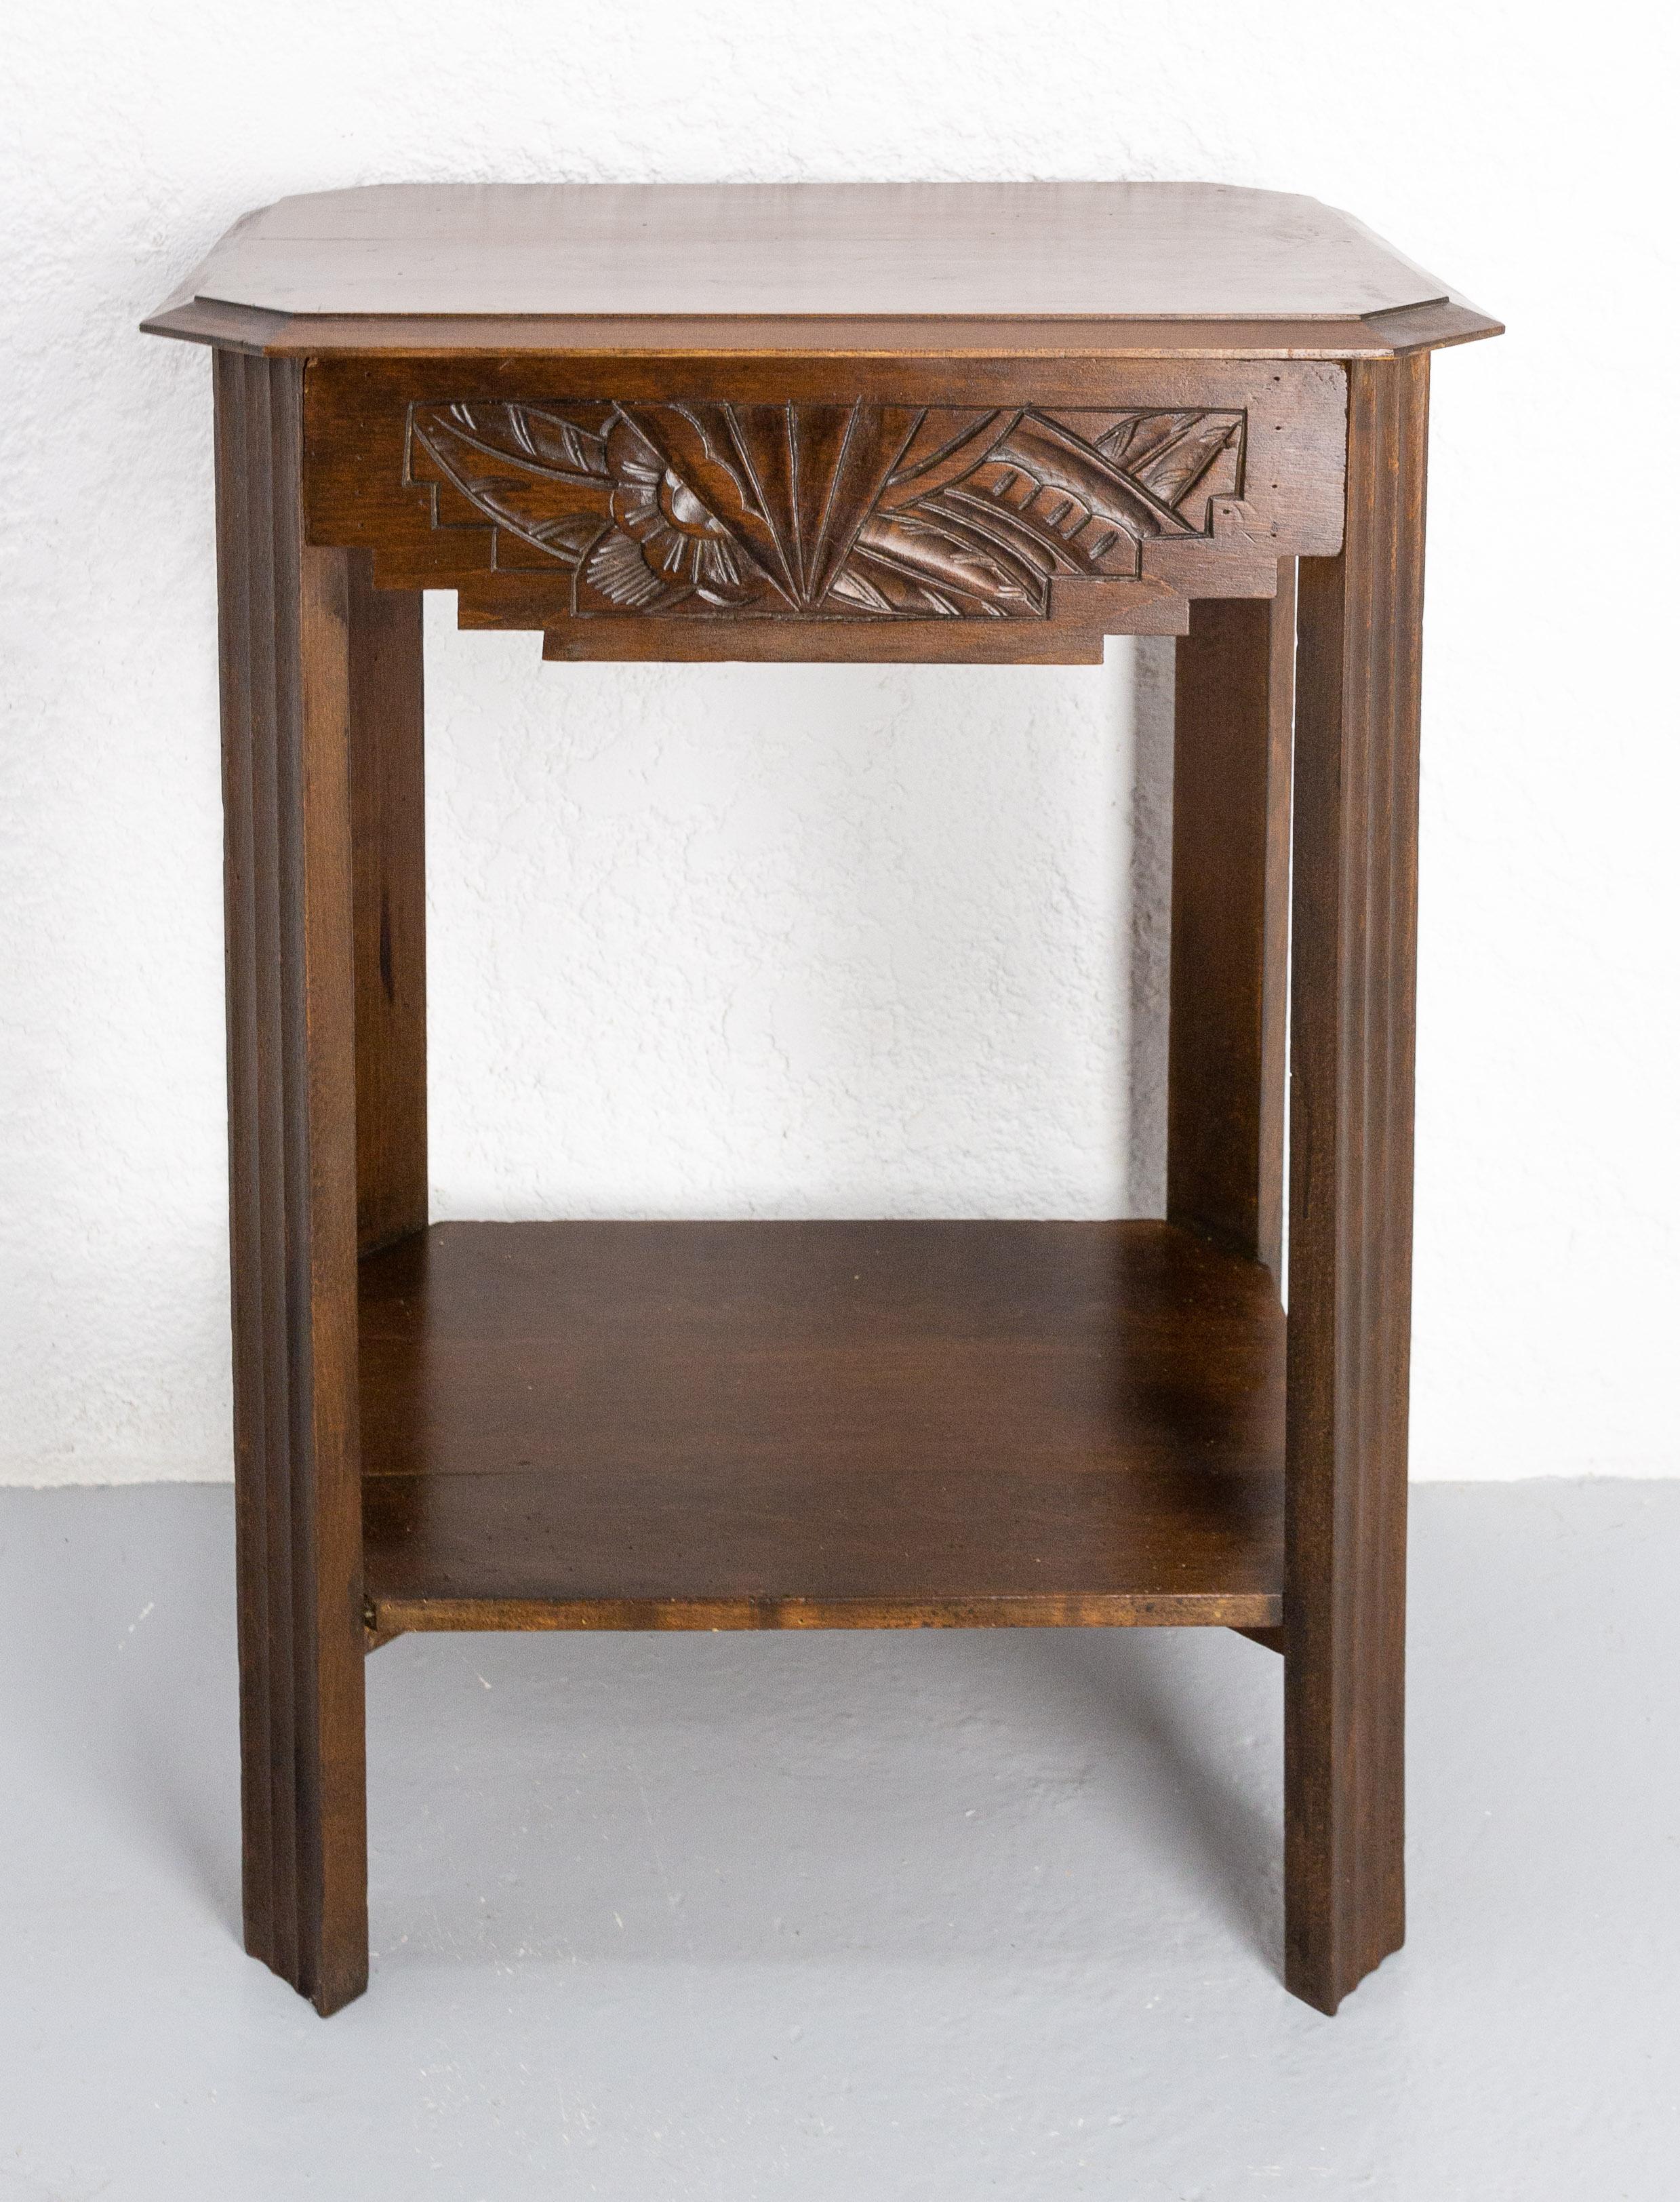 Side, end table, selette or nightstand. The size of this little table with a drawer allows to use it for different functions.
Made circa 1930, with the art déco characteristics: stylized flowers and canes 
Tinted poplar with nice